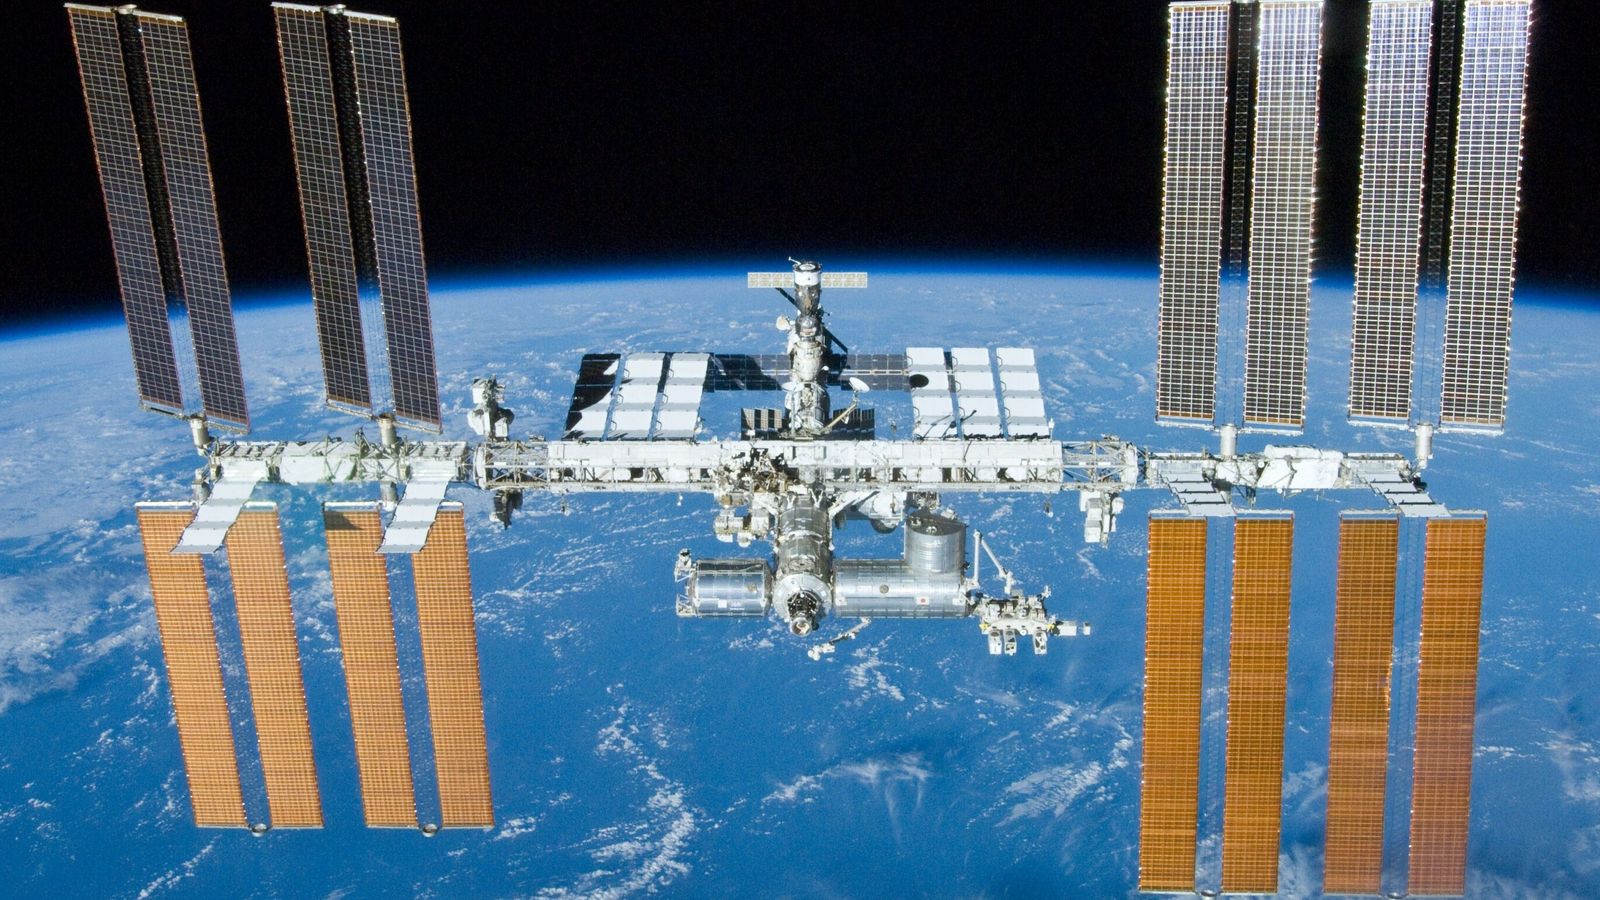 International Space Station could suffer ‘irreparable’ failures, Russian official warns